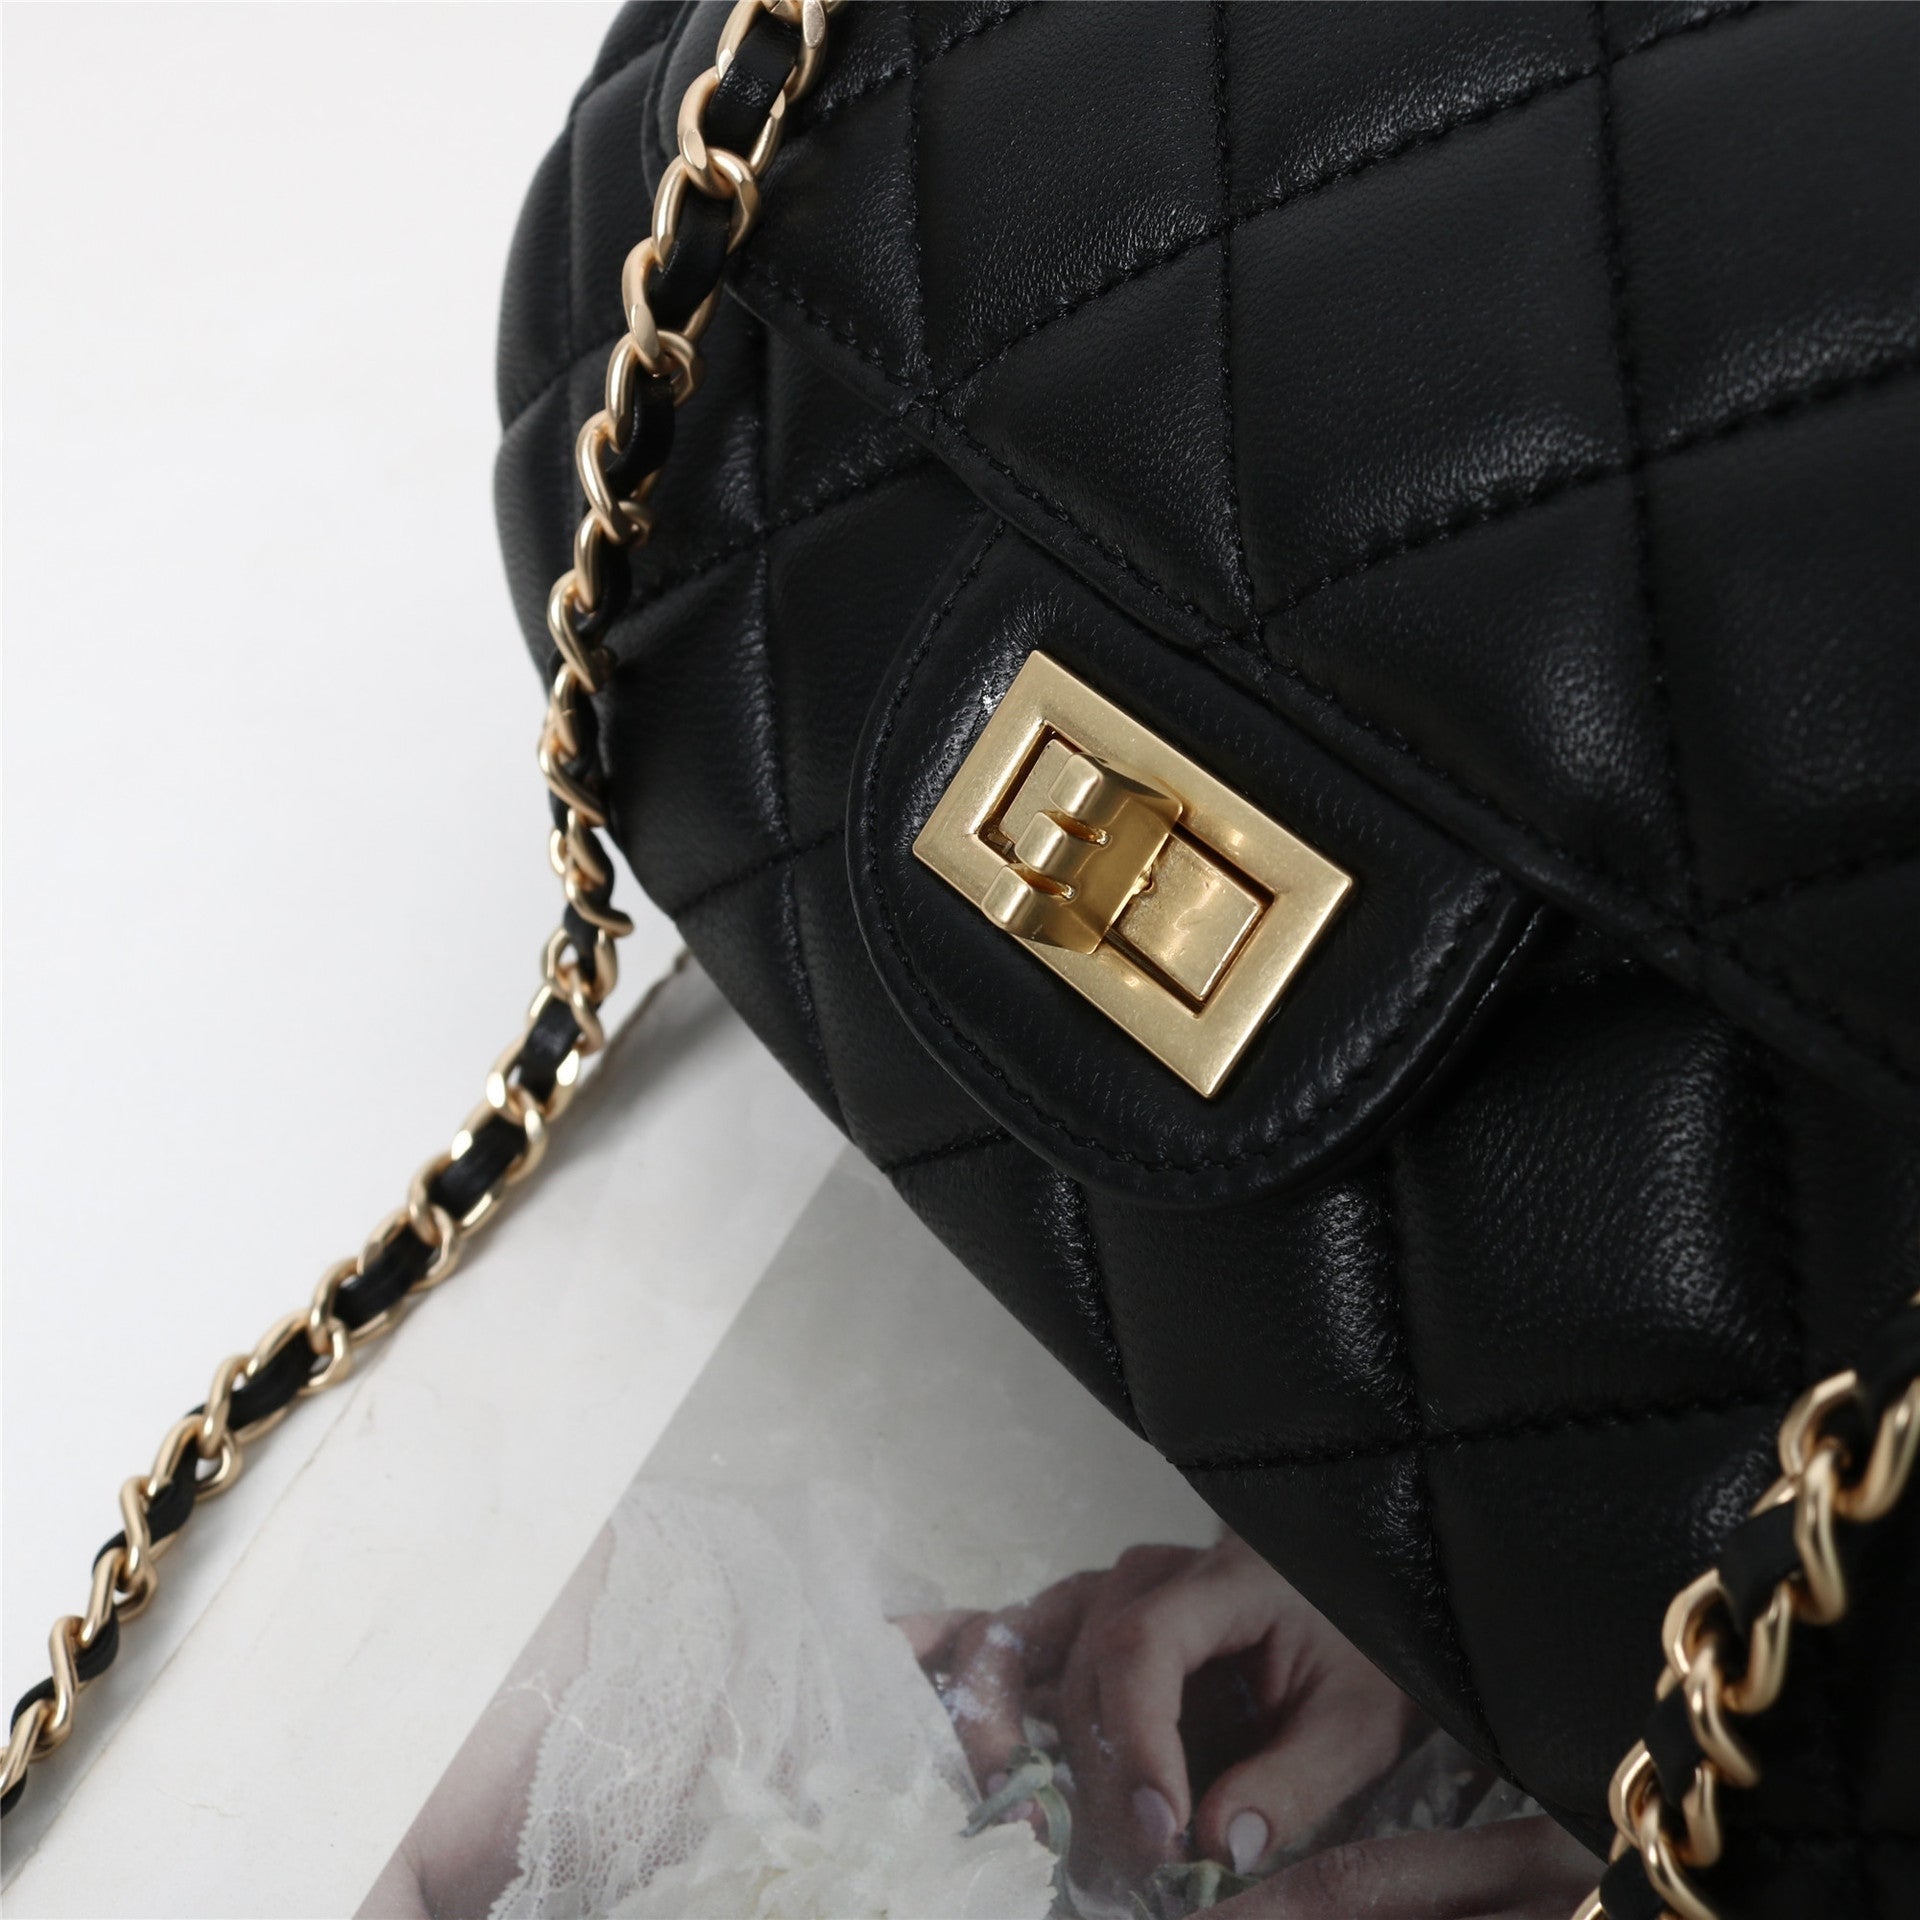 Womens Quilted Leather Cross Body Handle Flap Bag Black